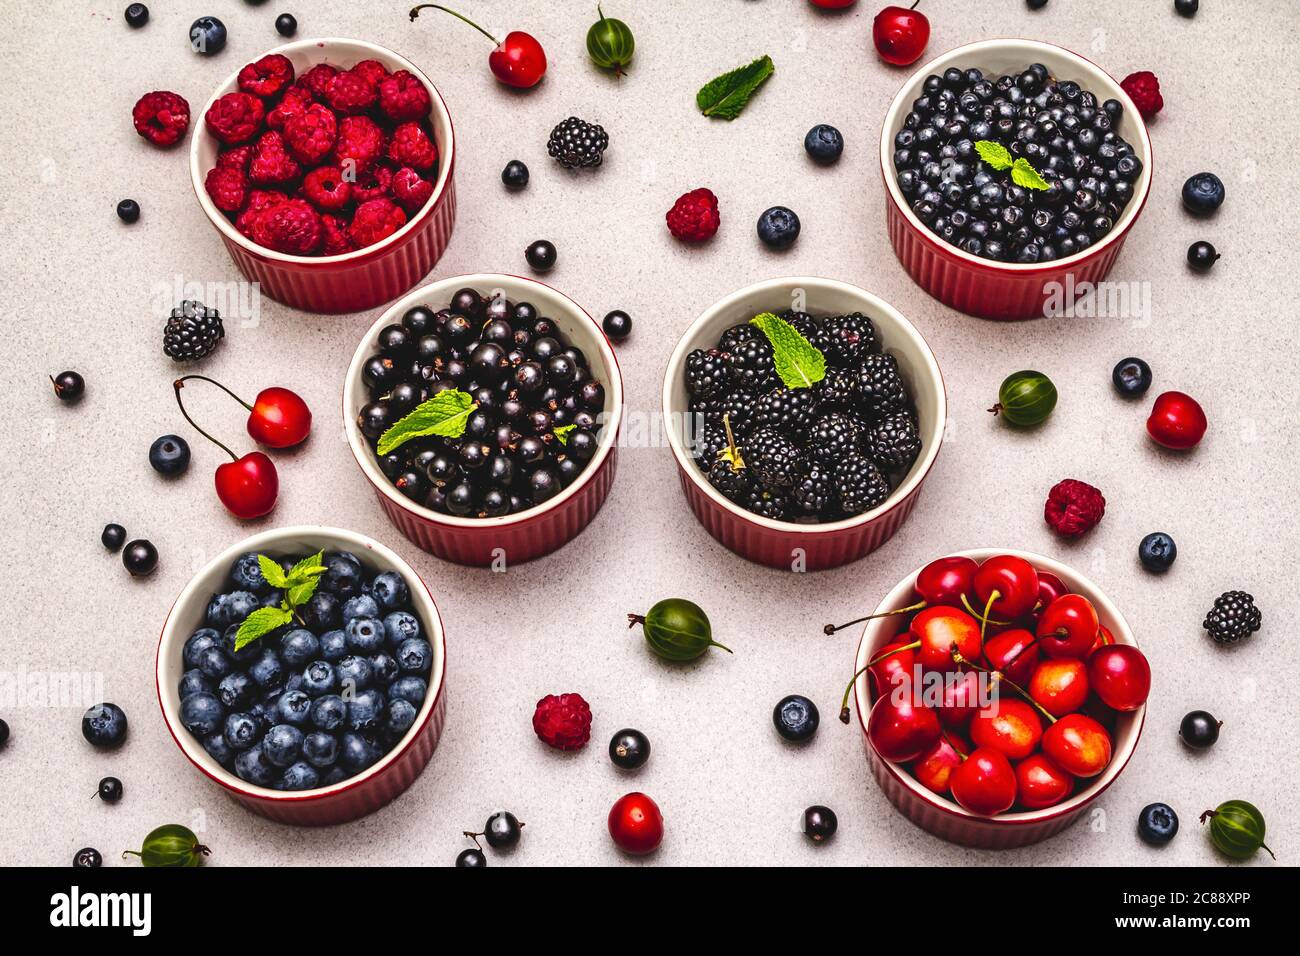 Assorted berries in bowls: bilberry, blueberry, currant, blackberry, cherry and raspberry. Stone concrete background, top view Stock Photo